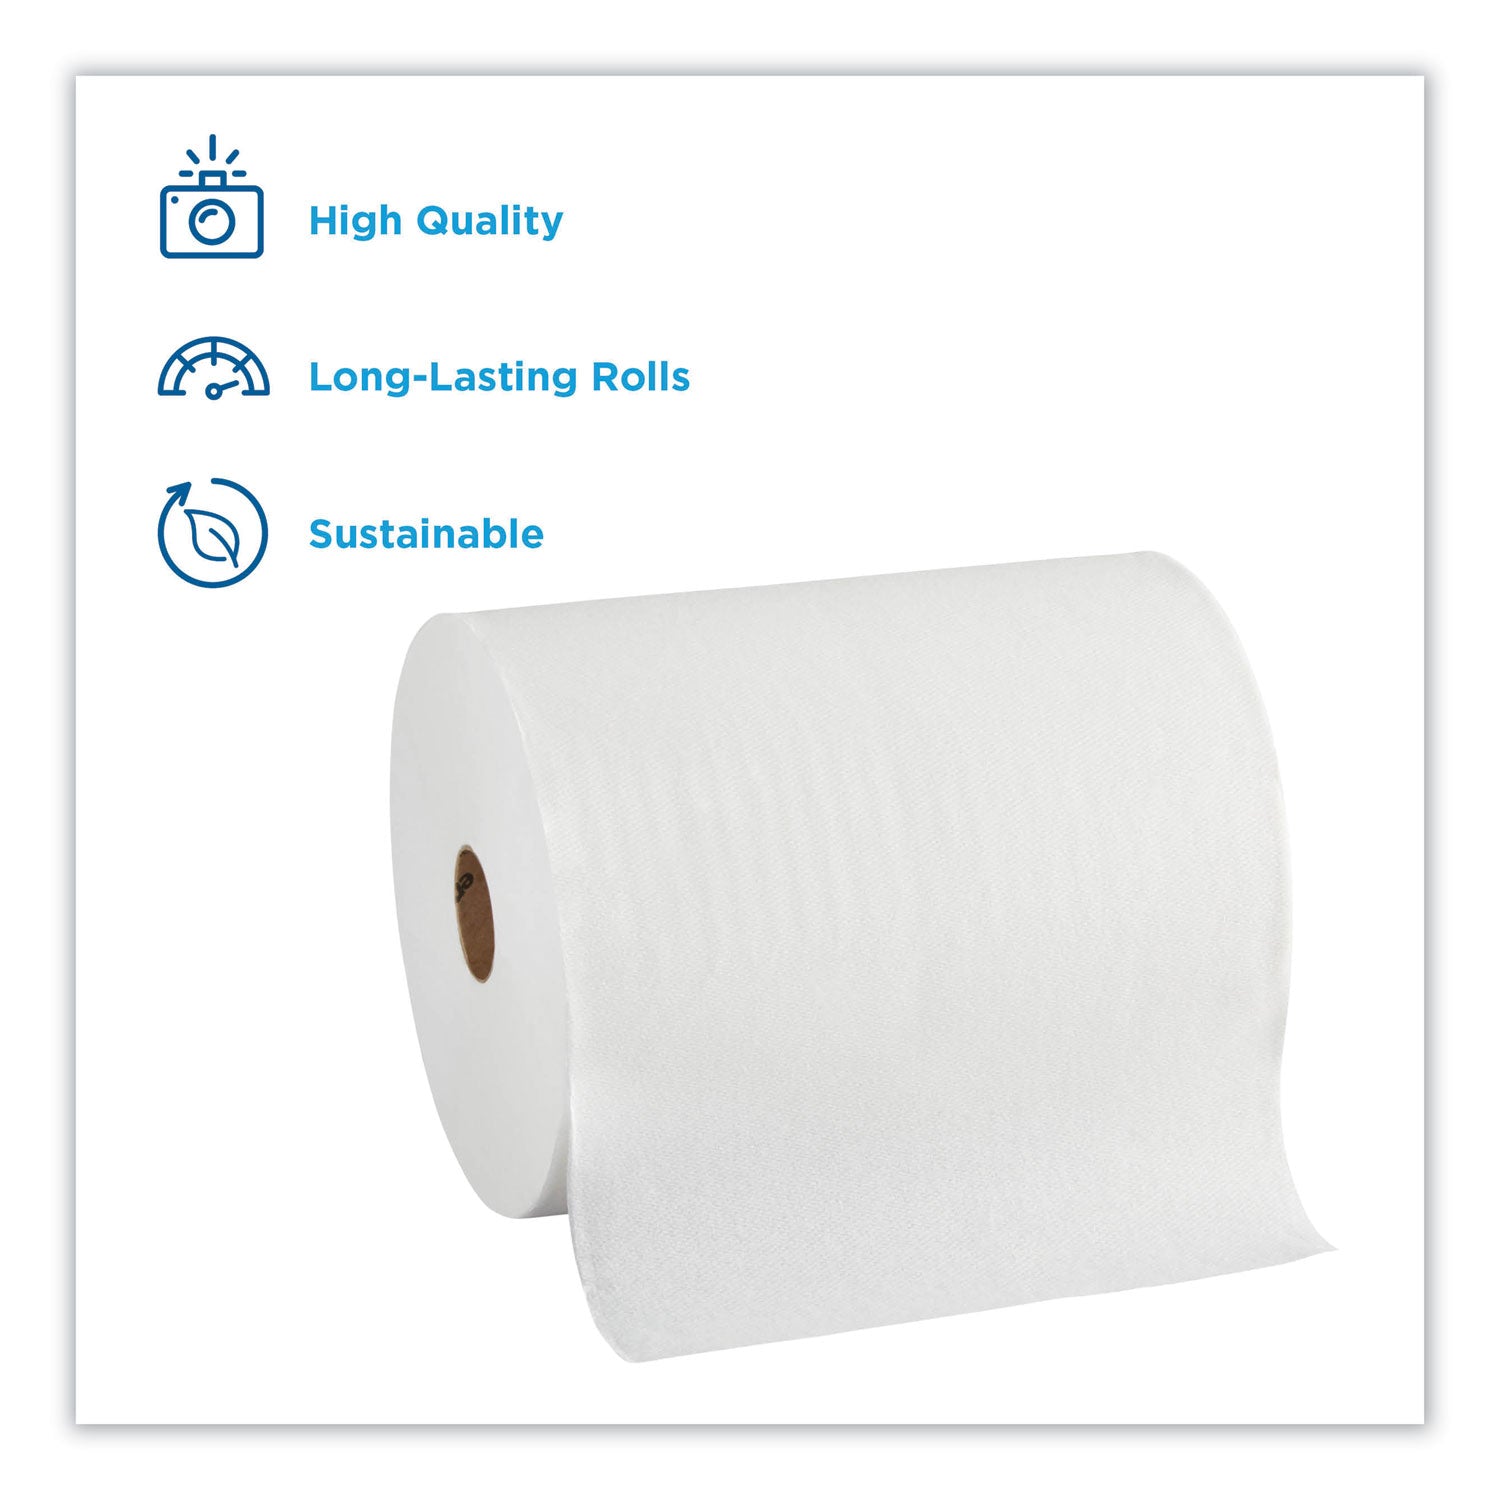 enMotion Paper Towel Rolls, 10" x 800', 40% Recycled, White, Pack Of 6 Rolls - 1 Ply - 10" x 800 ft - 1.75" Core - White - Soft, Absorbent, Long Lasting - For Multipurpose - 6 / Carton - 2